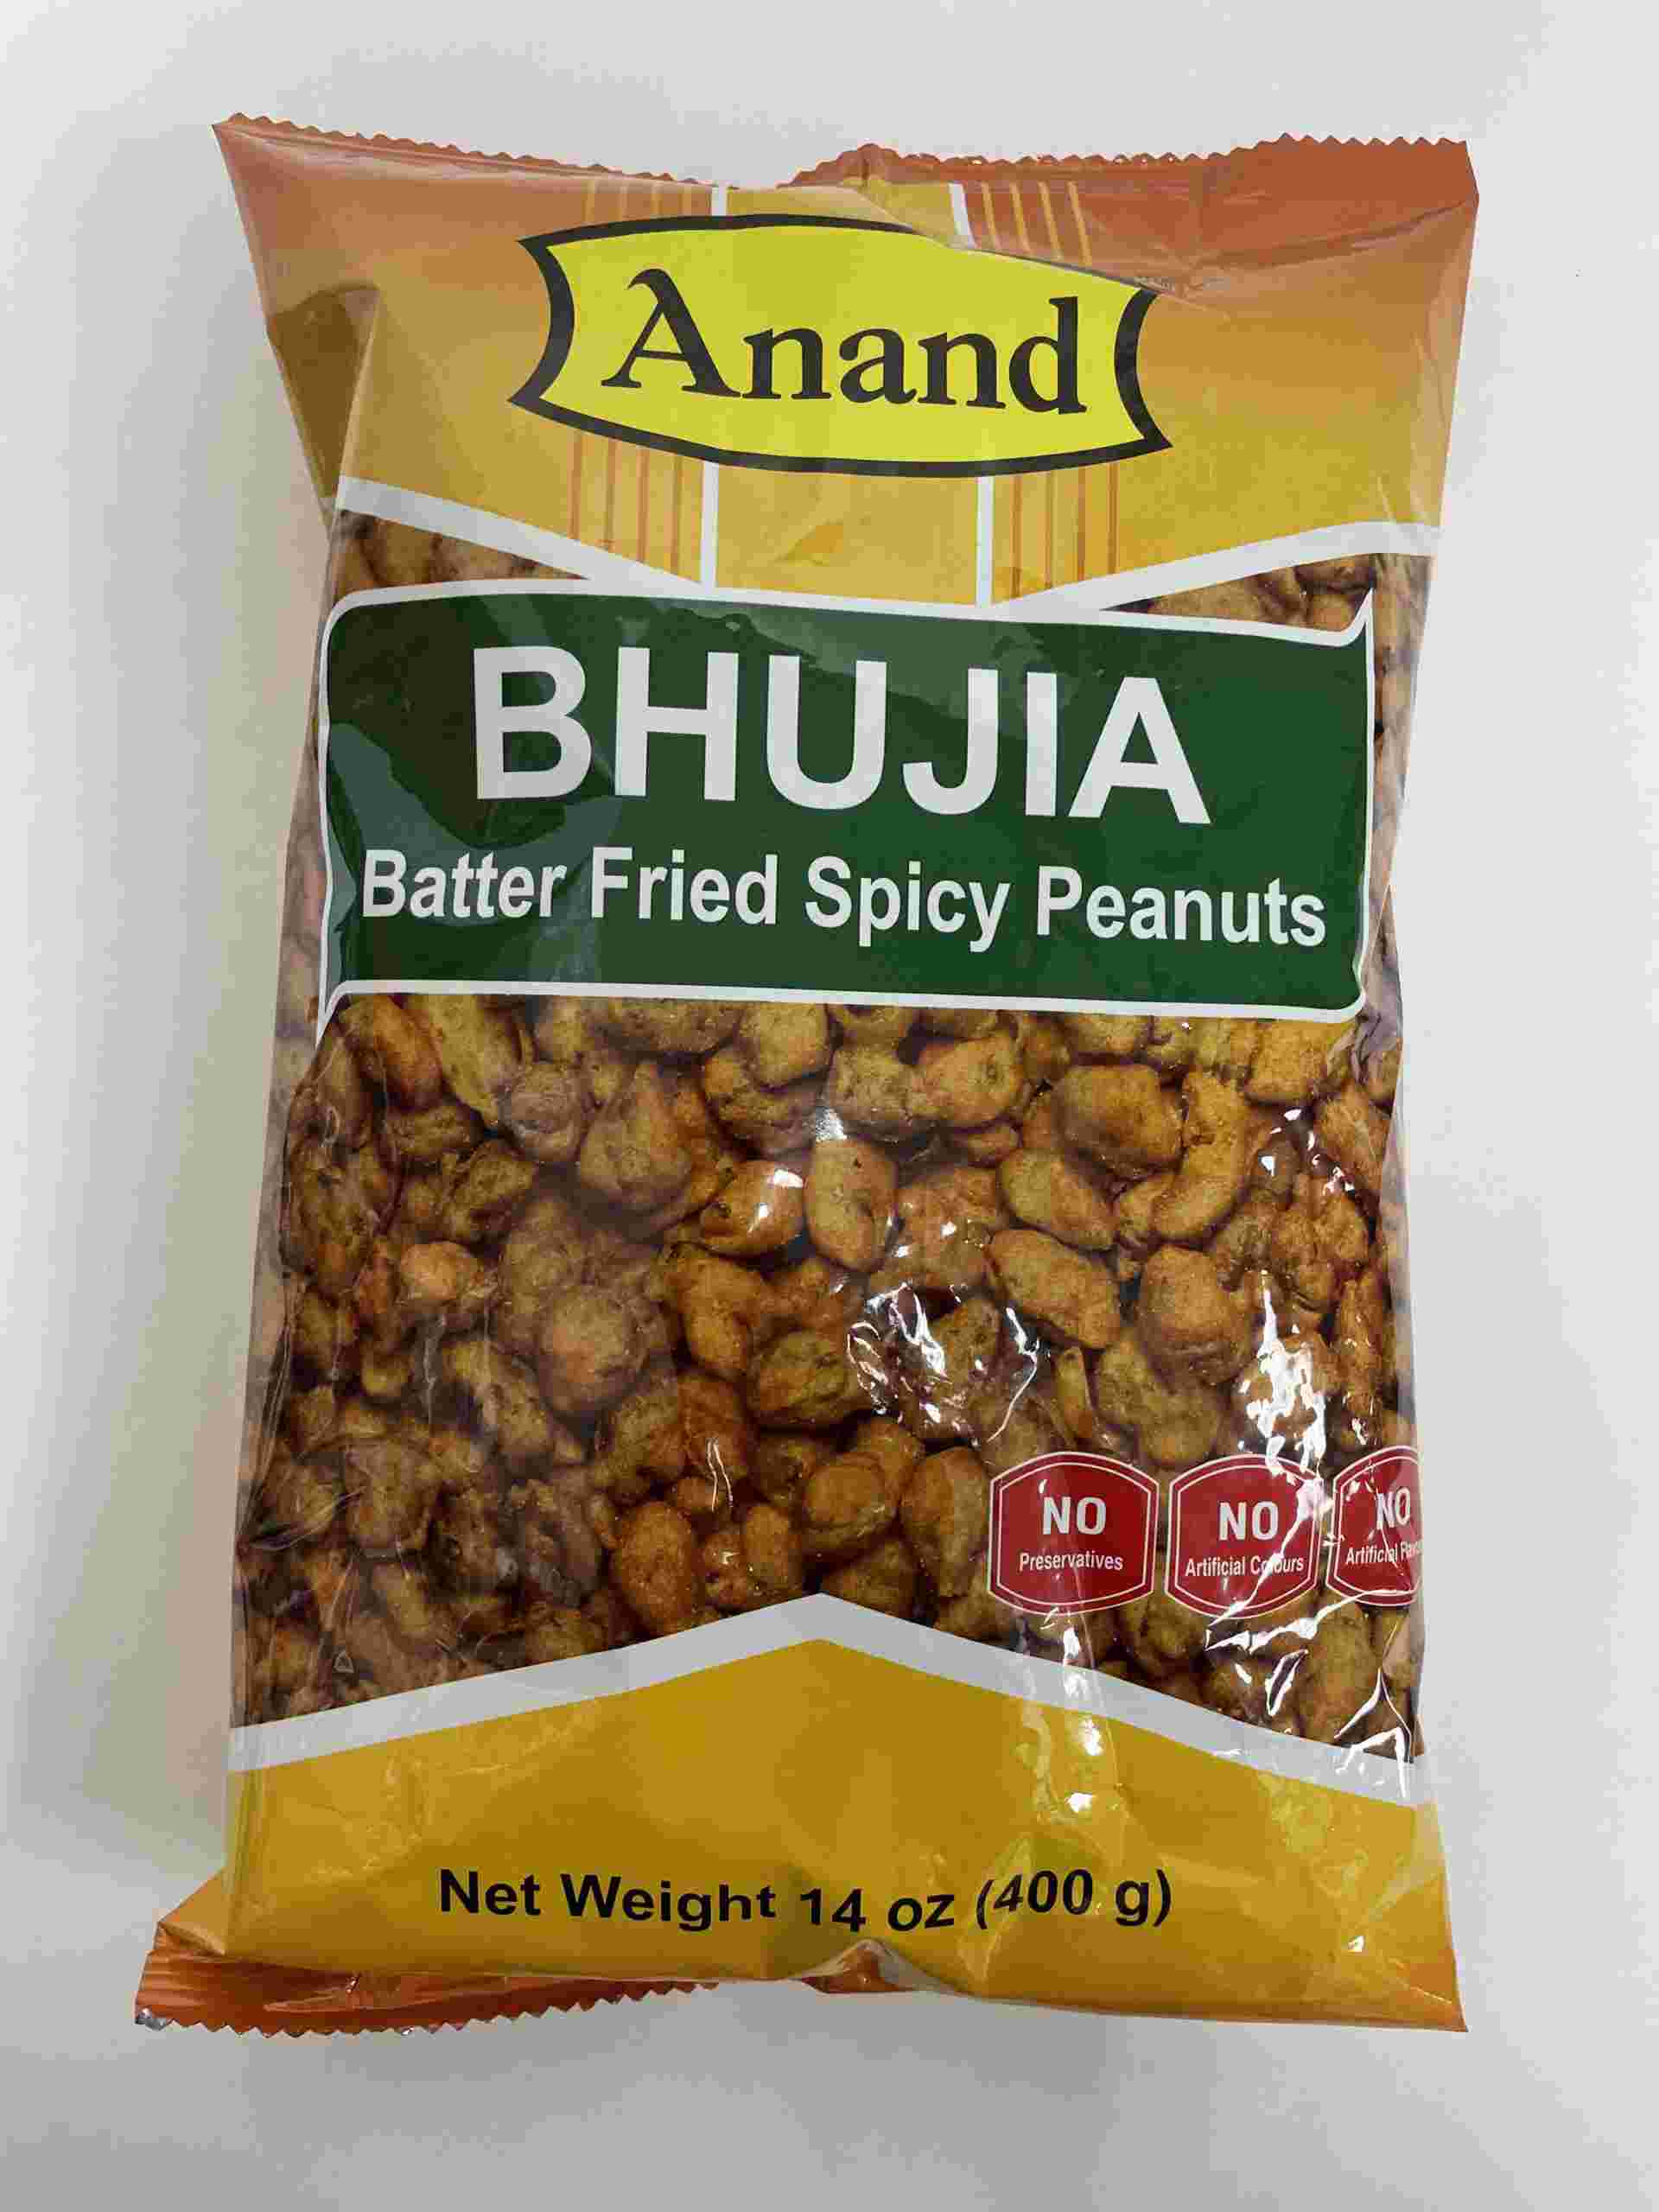 Anand Bhujia (Batter Fried Spicy Peanuts)